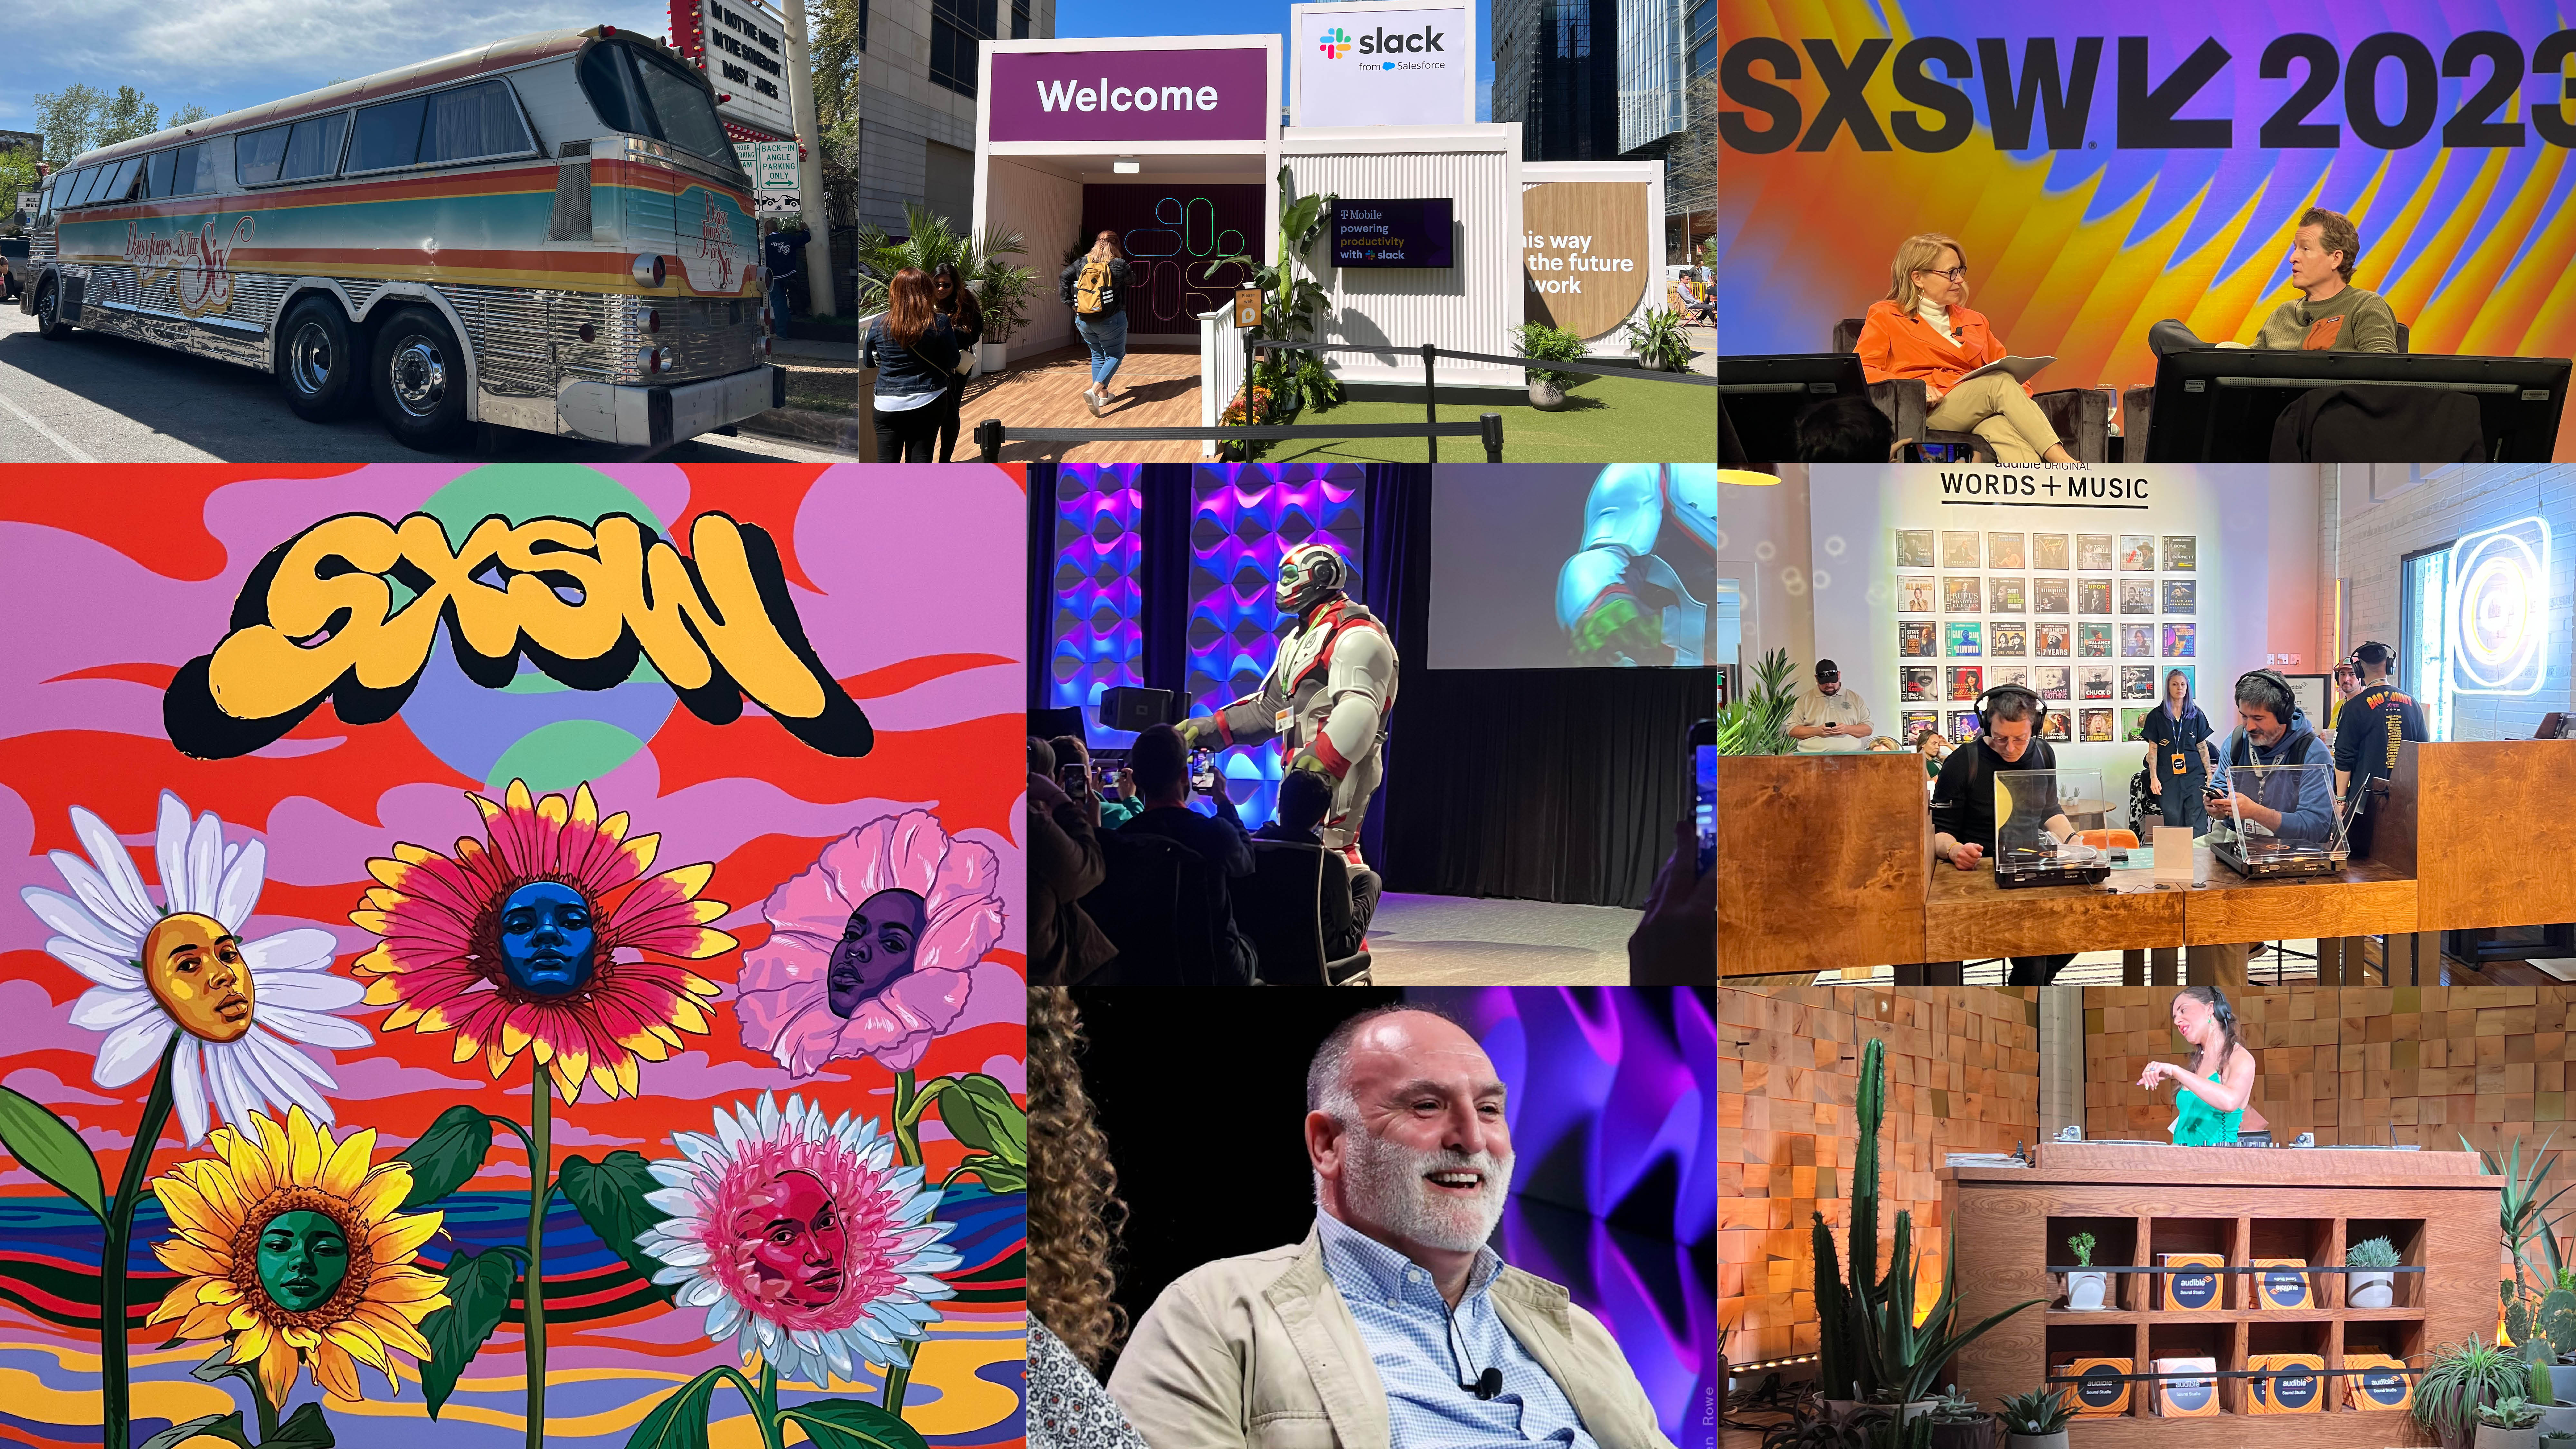 Collage of images from SXSW